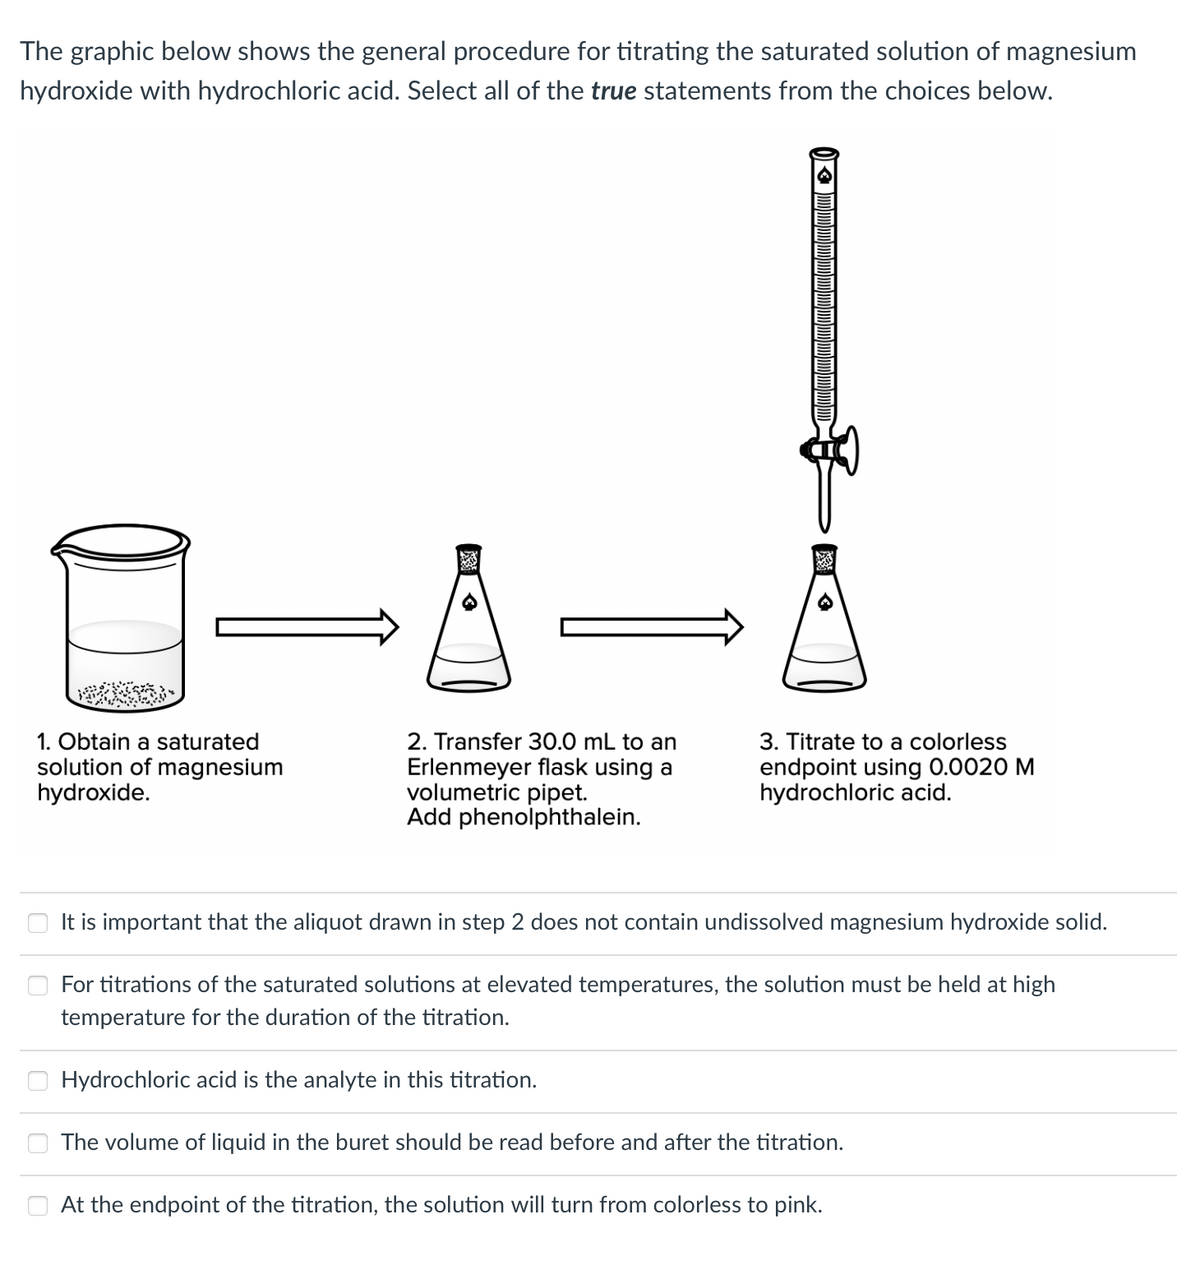 The graphic below shows the general procedure for titrating the saturated solution of magnesium
hydroxide with hydrochloric acid. Select all of the true statements from the choices below.
1. Obtain a saturated
solution of magnesium
hydroxide.
0
2. Transfer 30.0 mL to an
Erlenmeyer flask using a
volumetric pipet.
Add phenolphthalein.
3. Titrate to a colorless
endpoint using 0.0020 M
hydrochloric acid.
It is important that the aliquot drawn in step 2 does not contain undissolved magnesium hydroxide solid.
For titrations of the saturated solutions at elevated temperatures, the solution must be held at high
temperature for the duration of the titration.
Hydrochloric acid is the analyte in this titration.
The volume of liquid in the buret should be read before and after the titration.
At the endpoint of the titration, the solution will turn from colorless to pink.